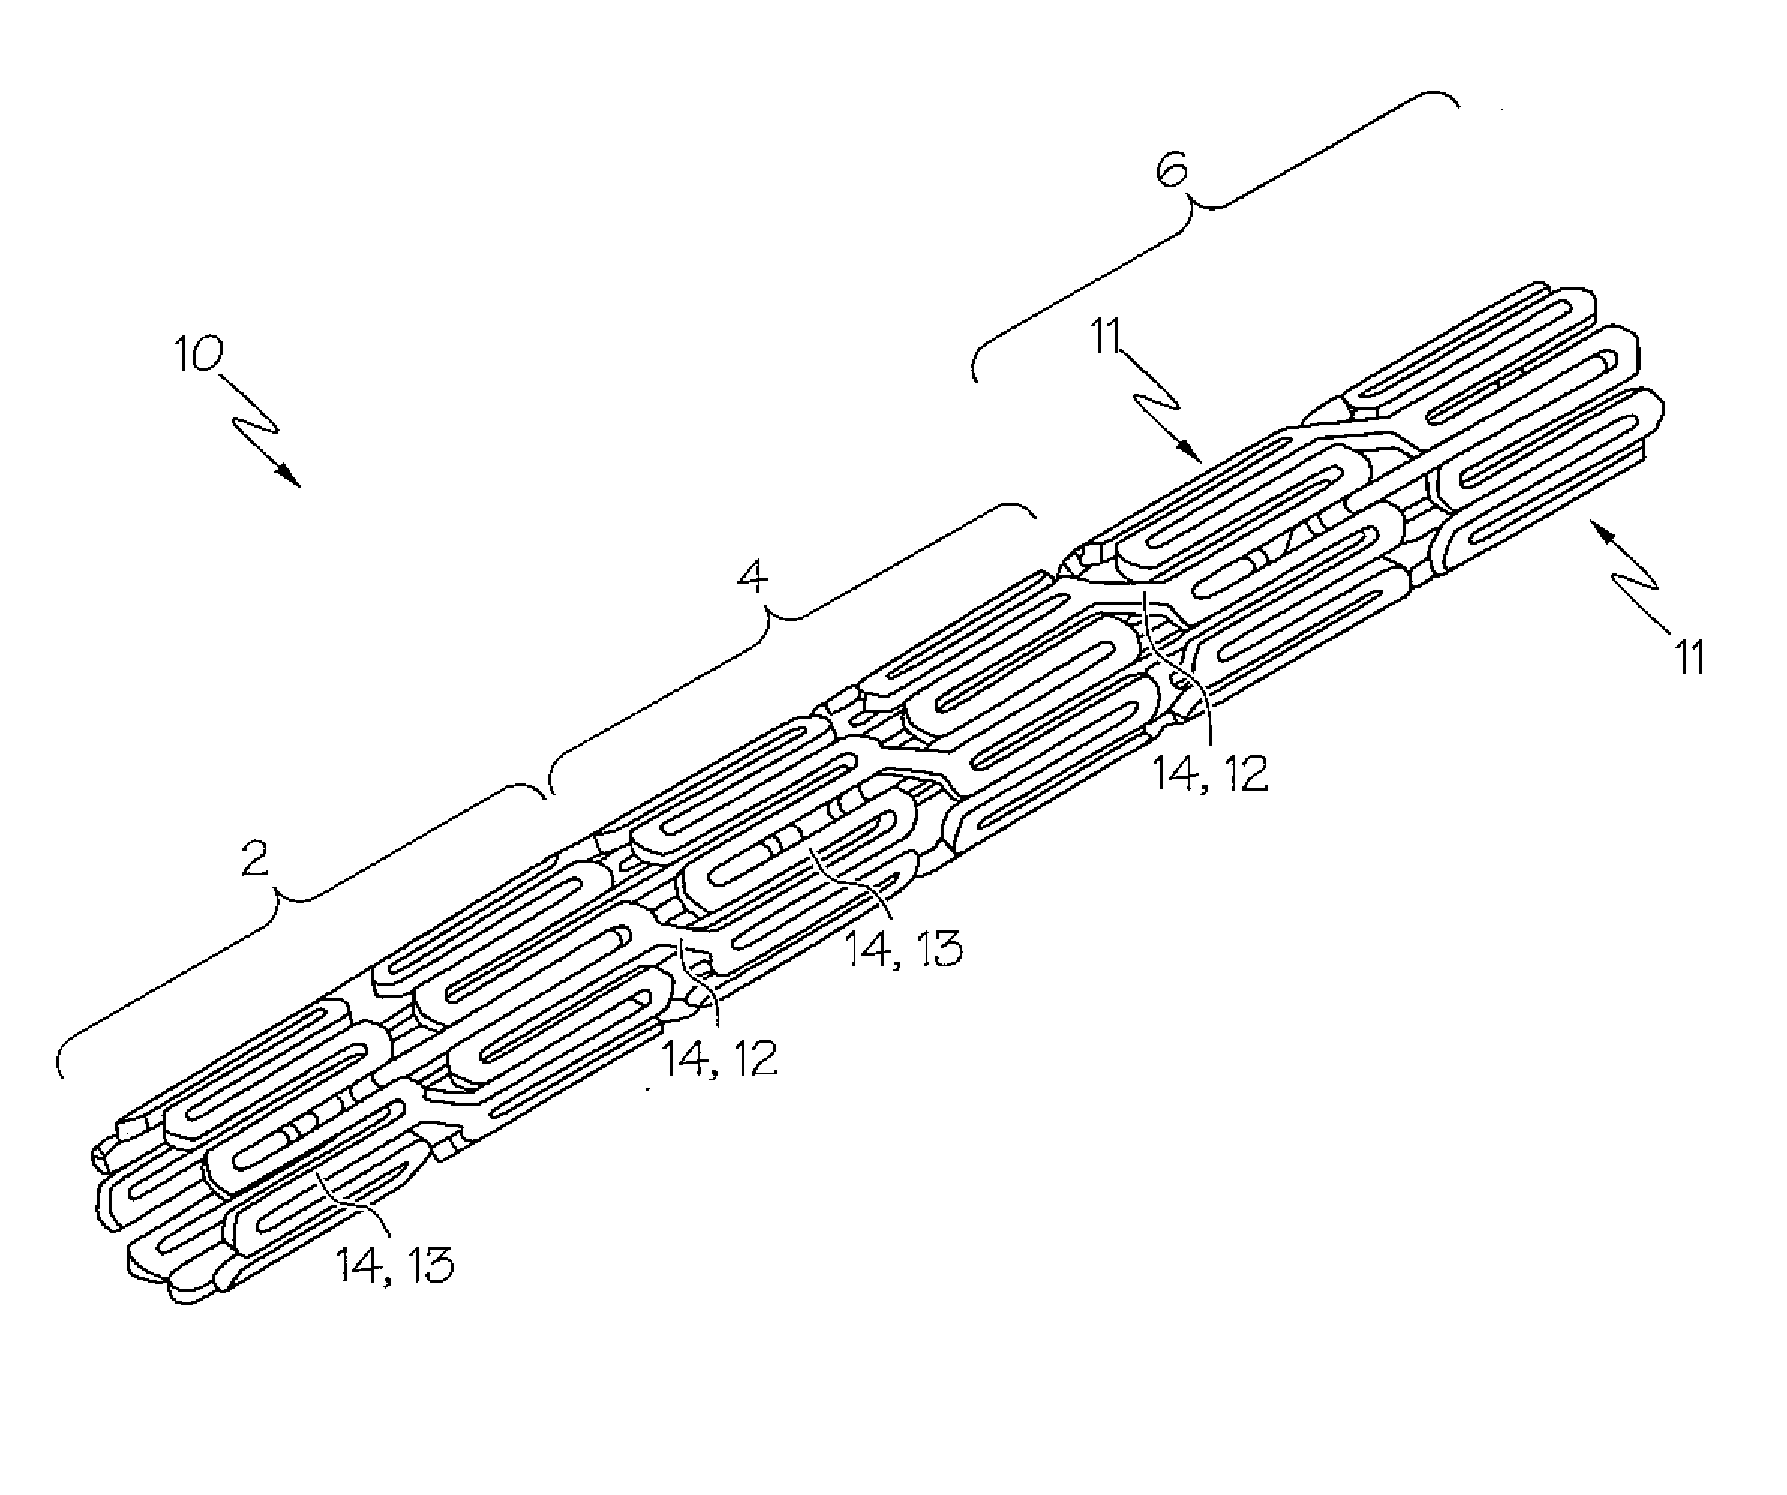 Stent Design Allowing Extended Release of Drug and/or Enhanced Adhesion of Polymer to OD Surface